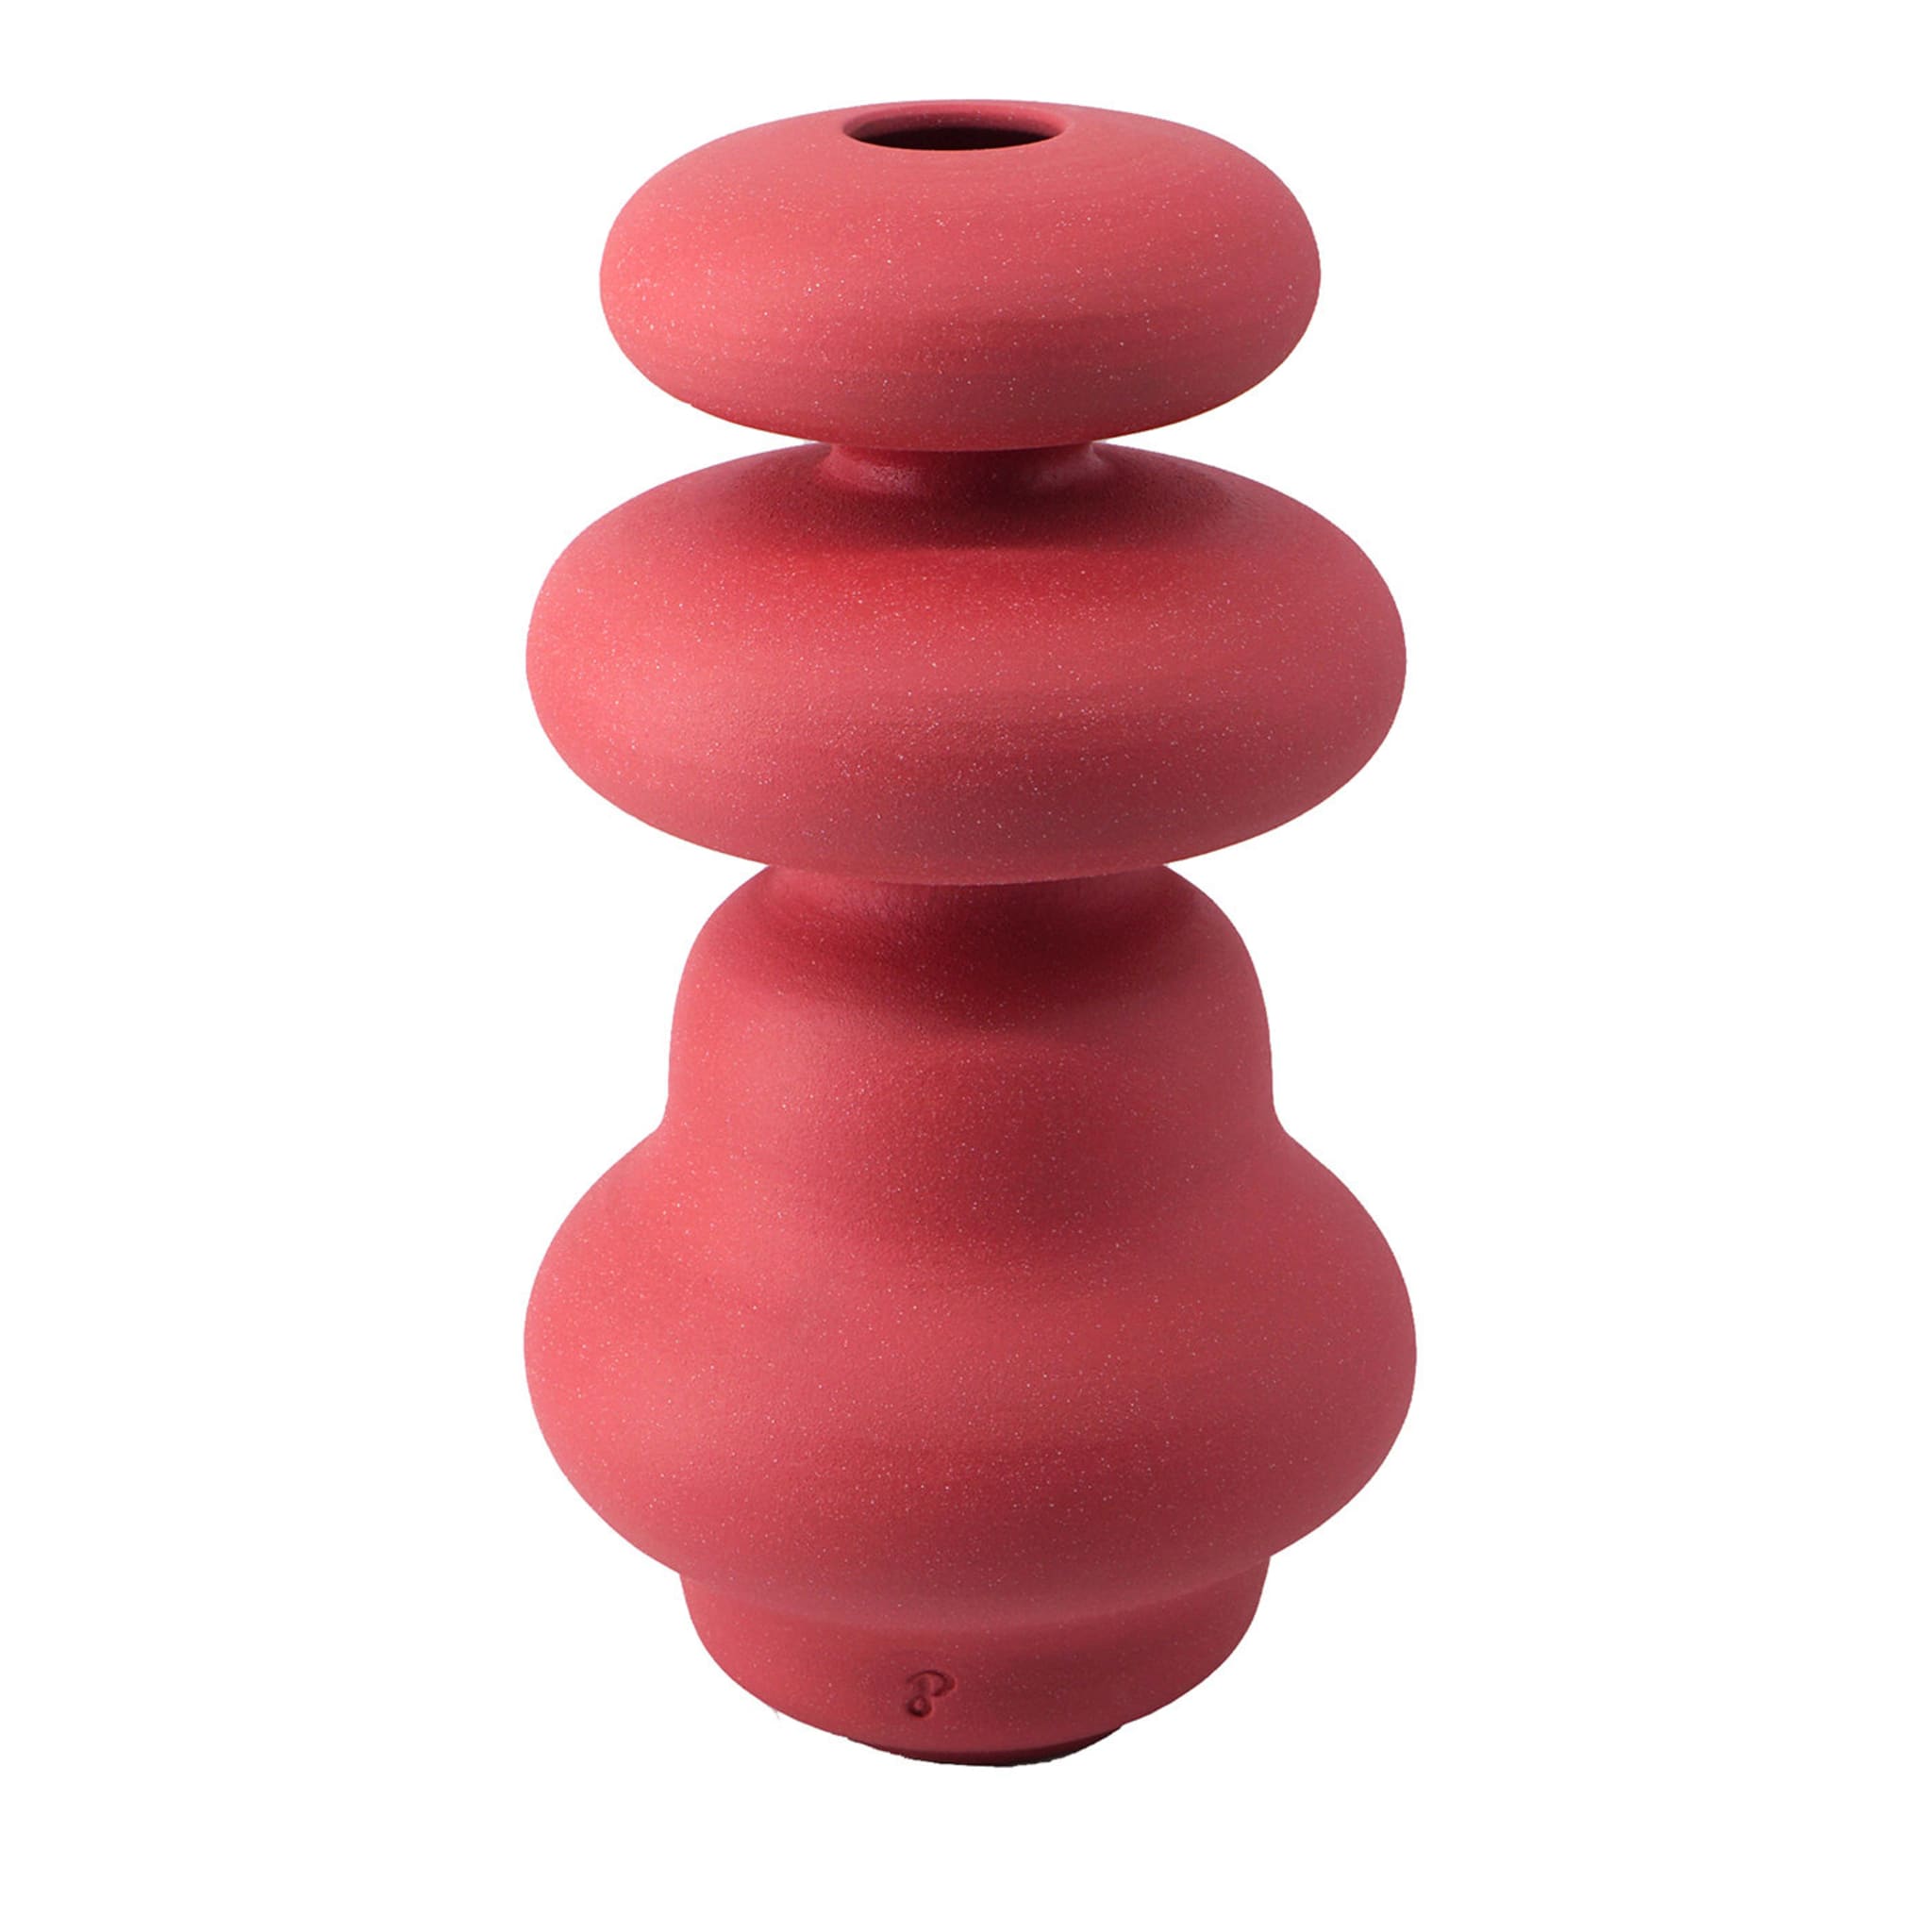 Crisalide Red Vase #2 - Main view